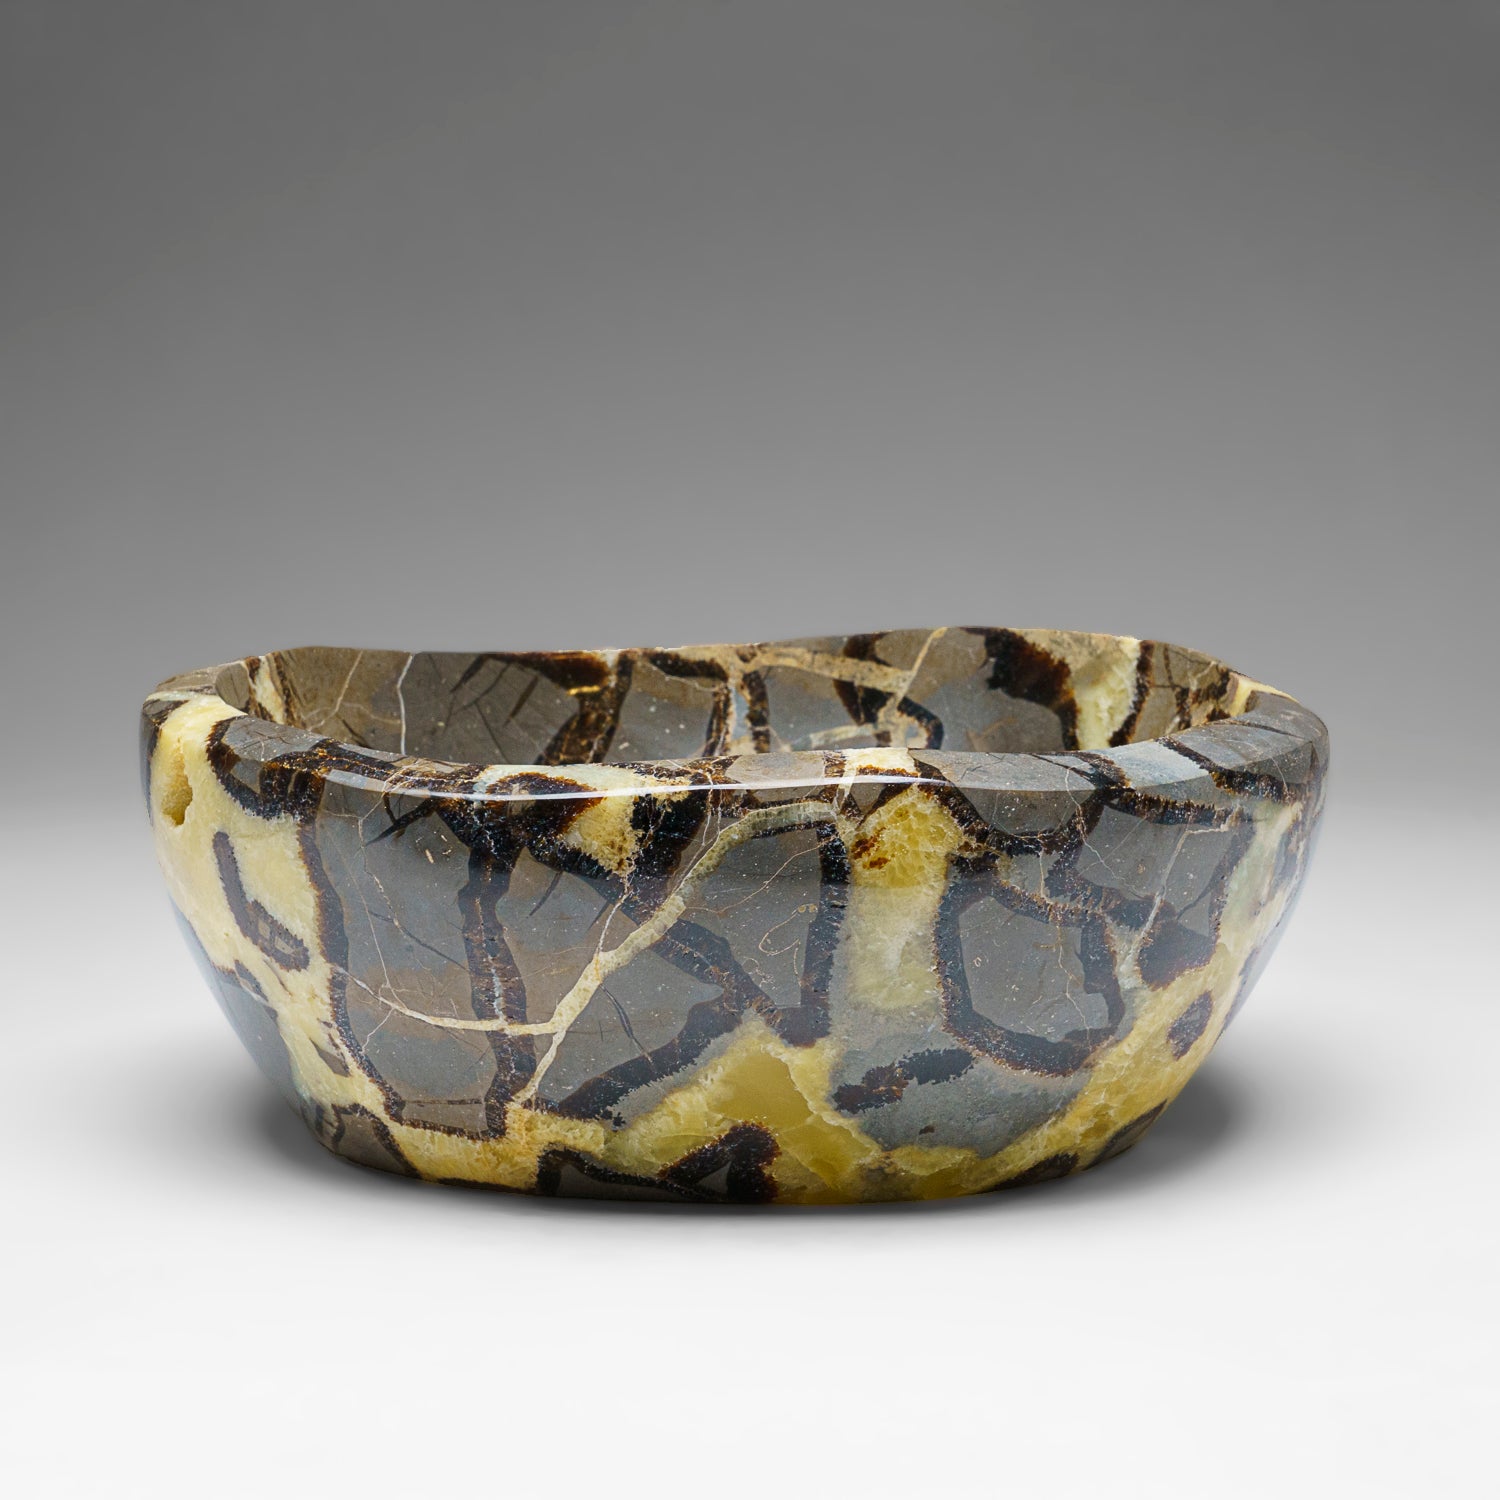 Genuine Polished Septarian Bowl from Madagascar (4.4 lbs)